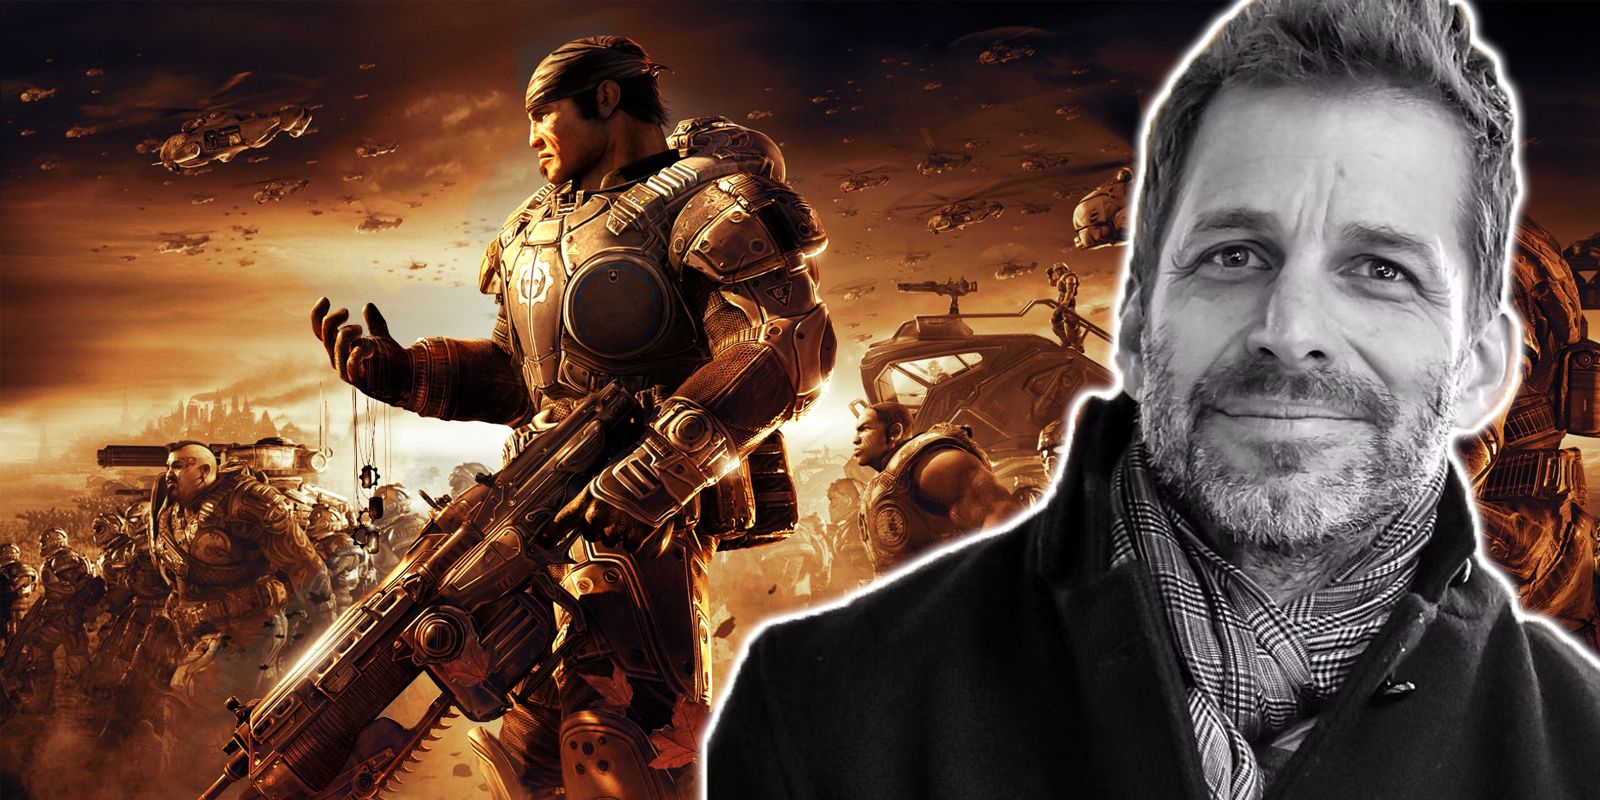 Gears of War Creator Thinks Zack Snyder, Dave Bautista Would Be 'Great Fit'  for Upcoming Movie